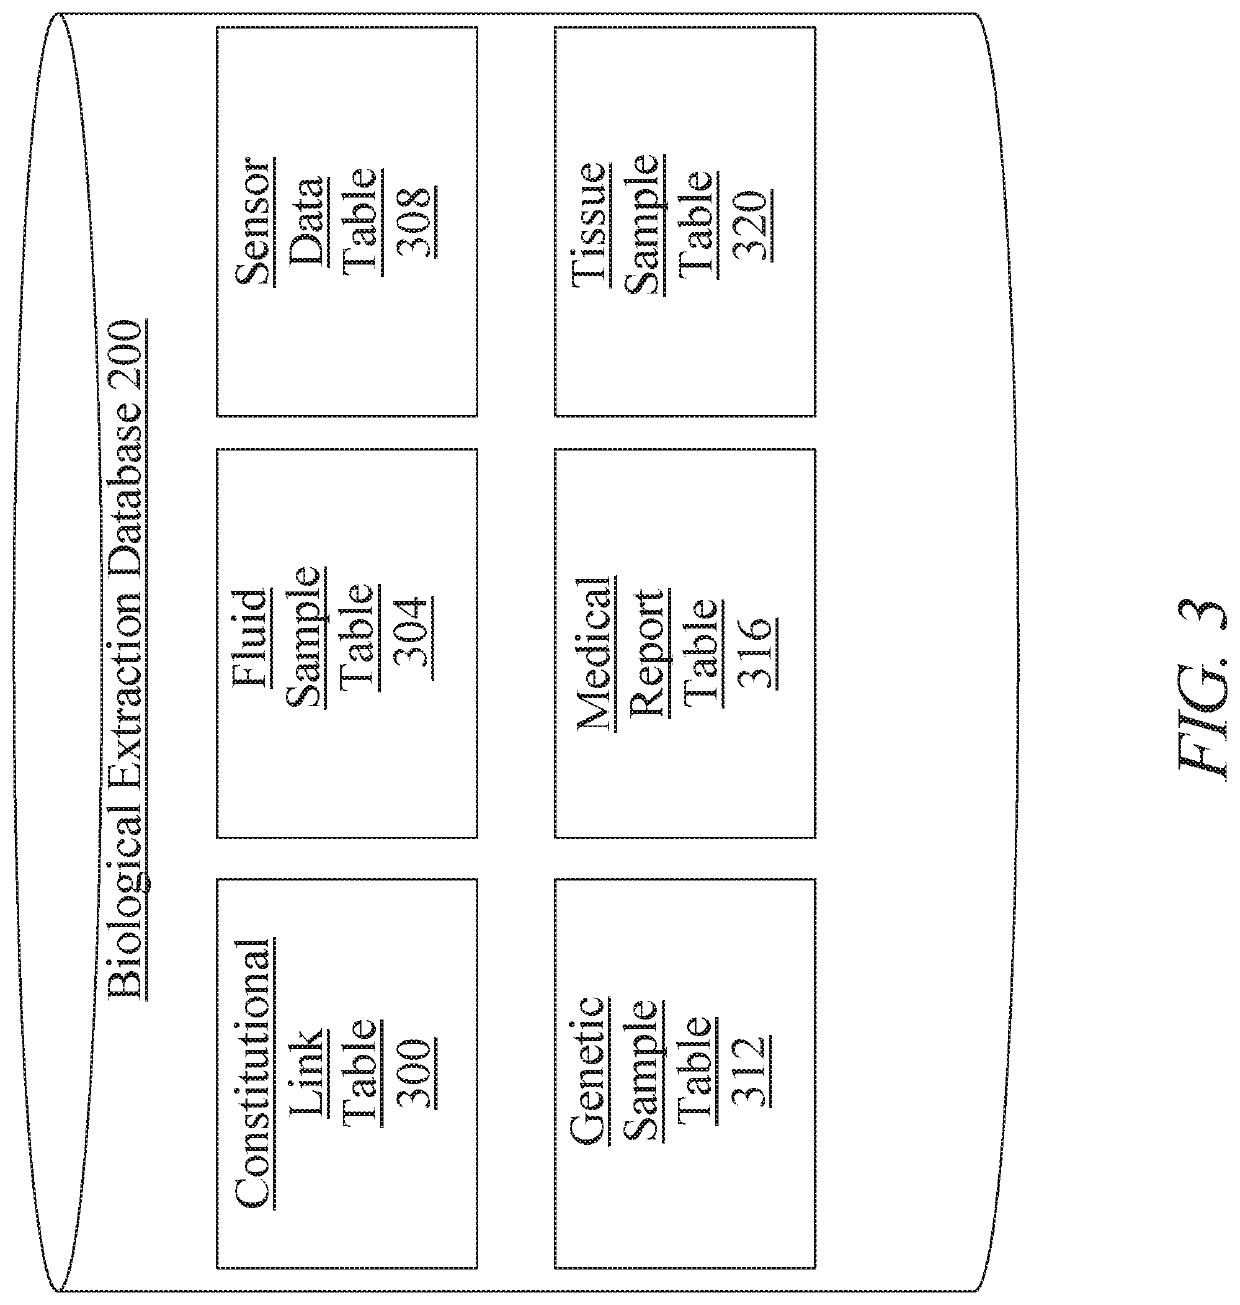 Methods and systems for medical record searching with transmittable machine learning